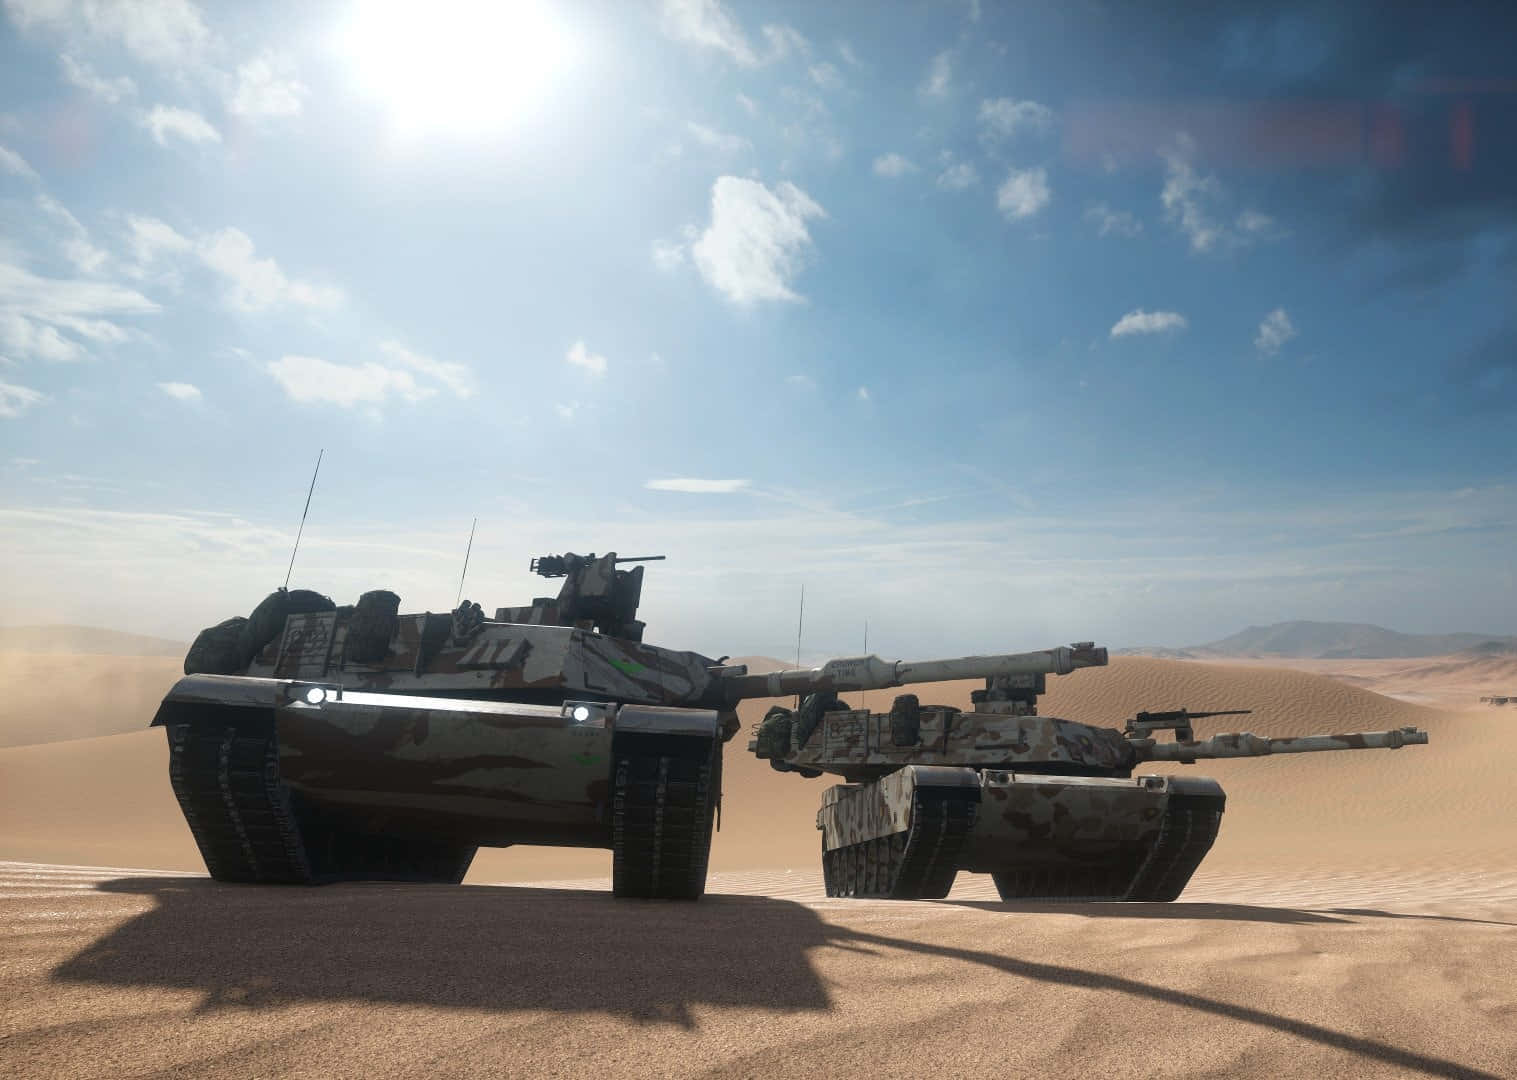 Dynamic Battlefield Vehicles in Action Wallpaper